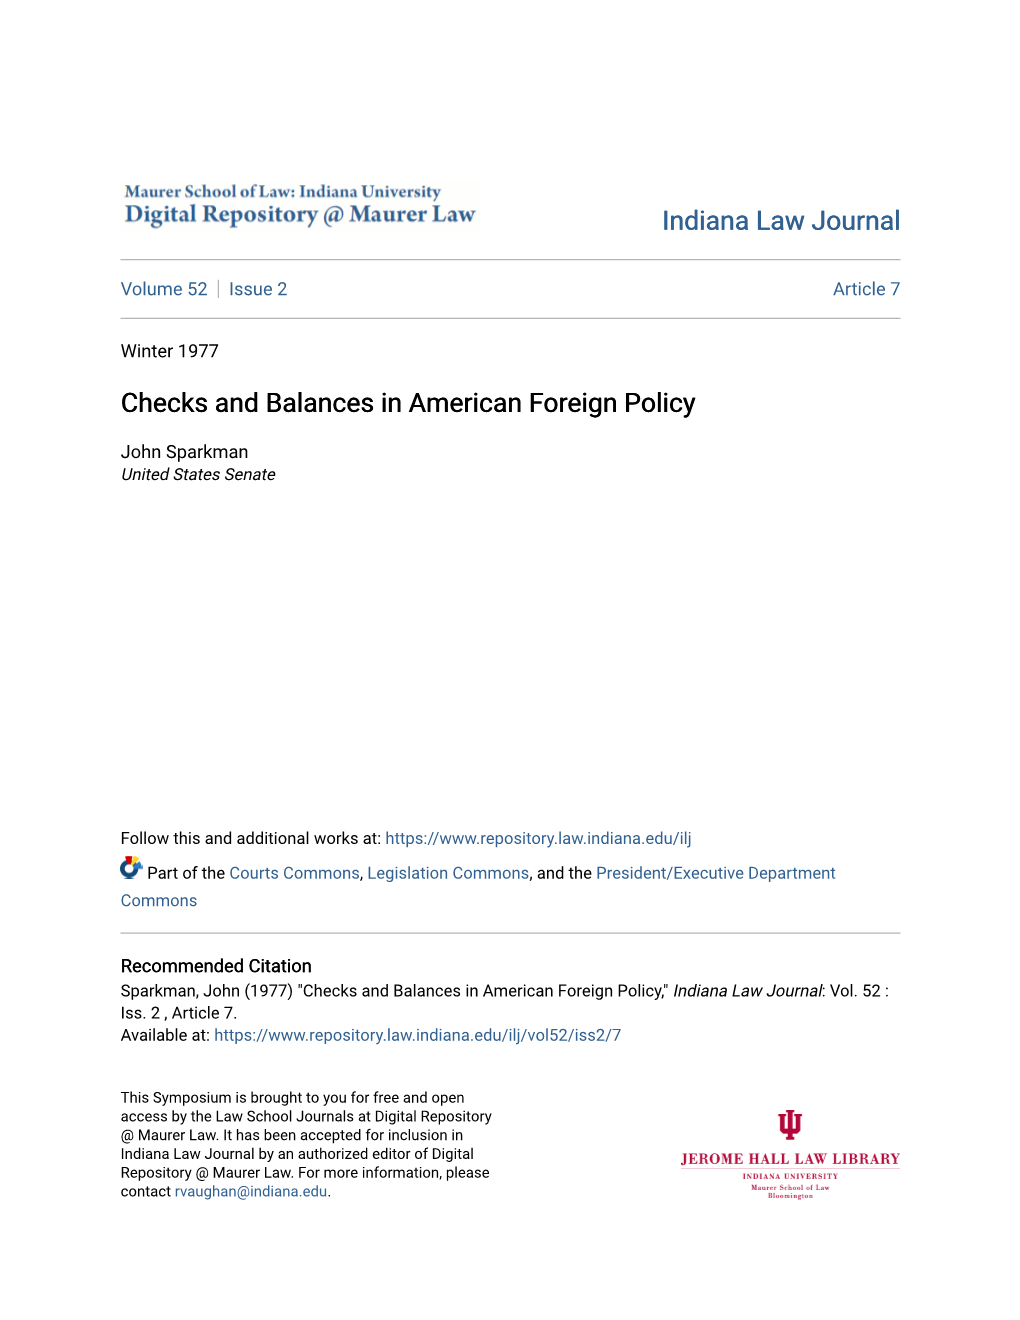 Checks and Balances in American Foreign Policy